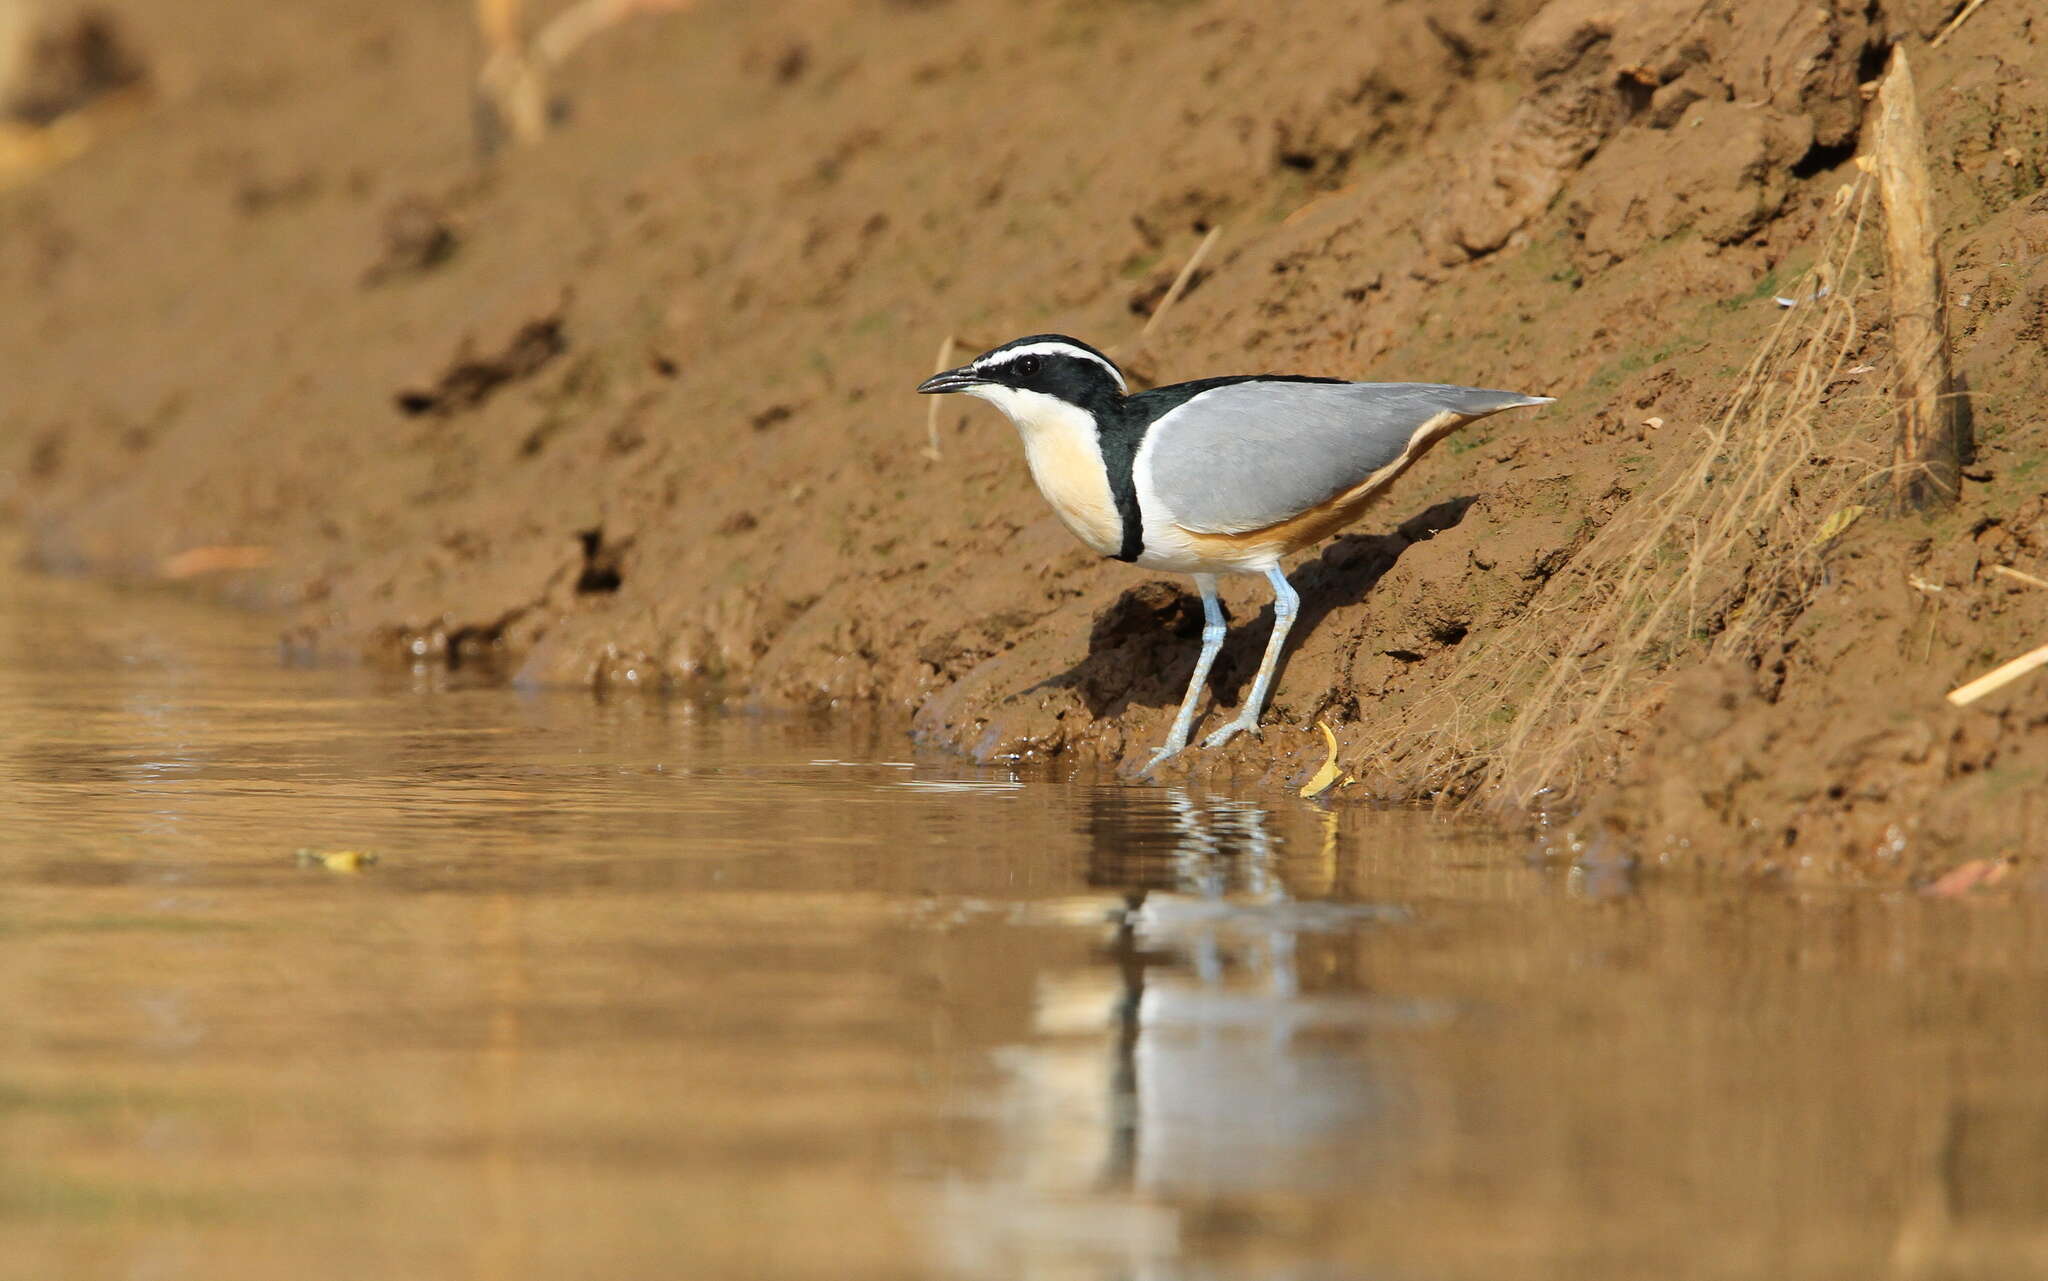 Image of Egyptian plovers